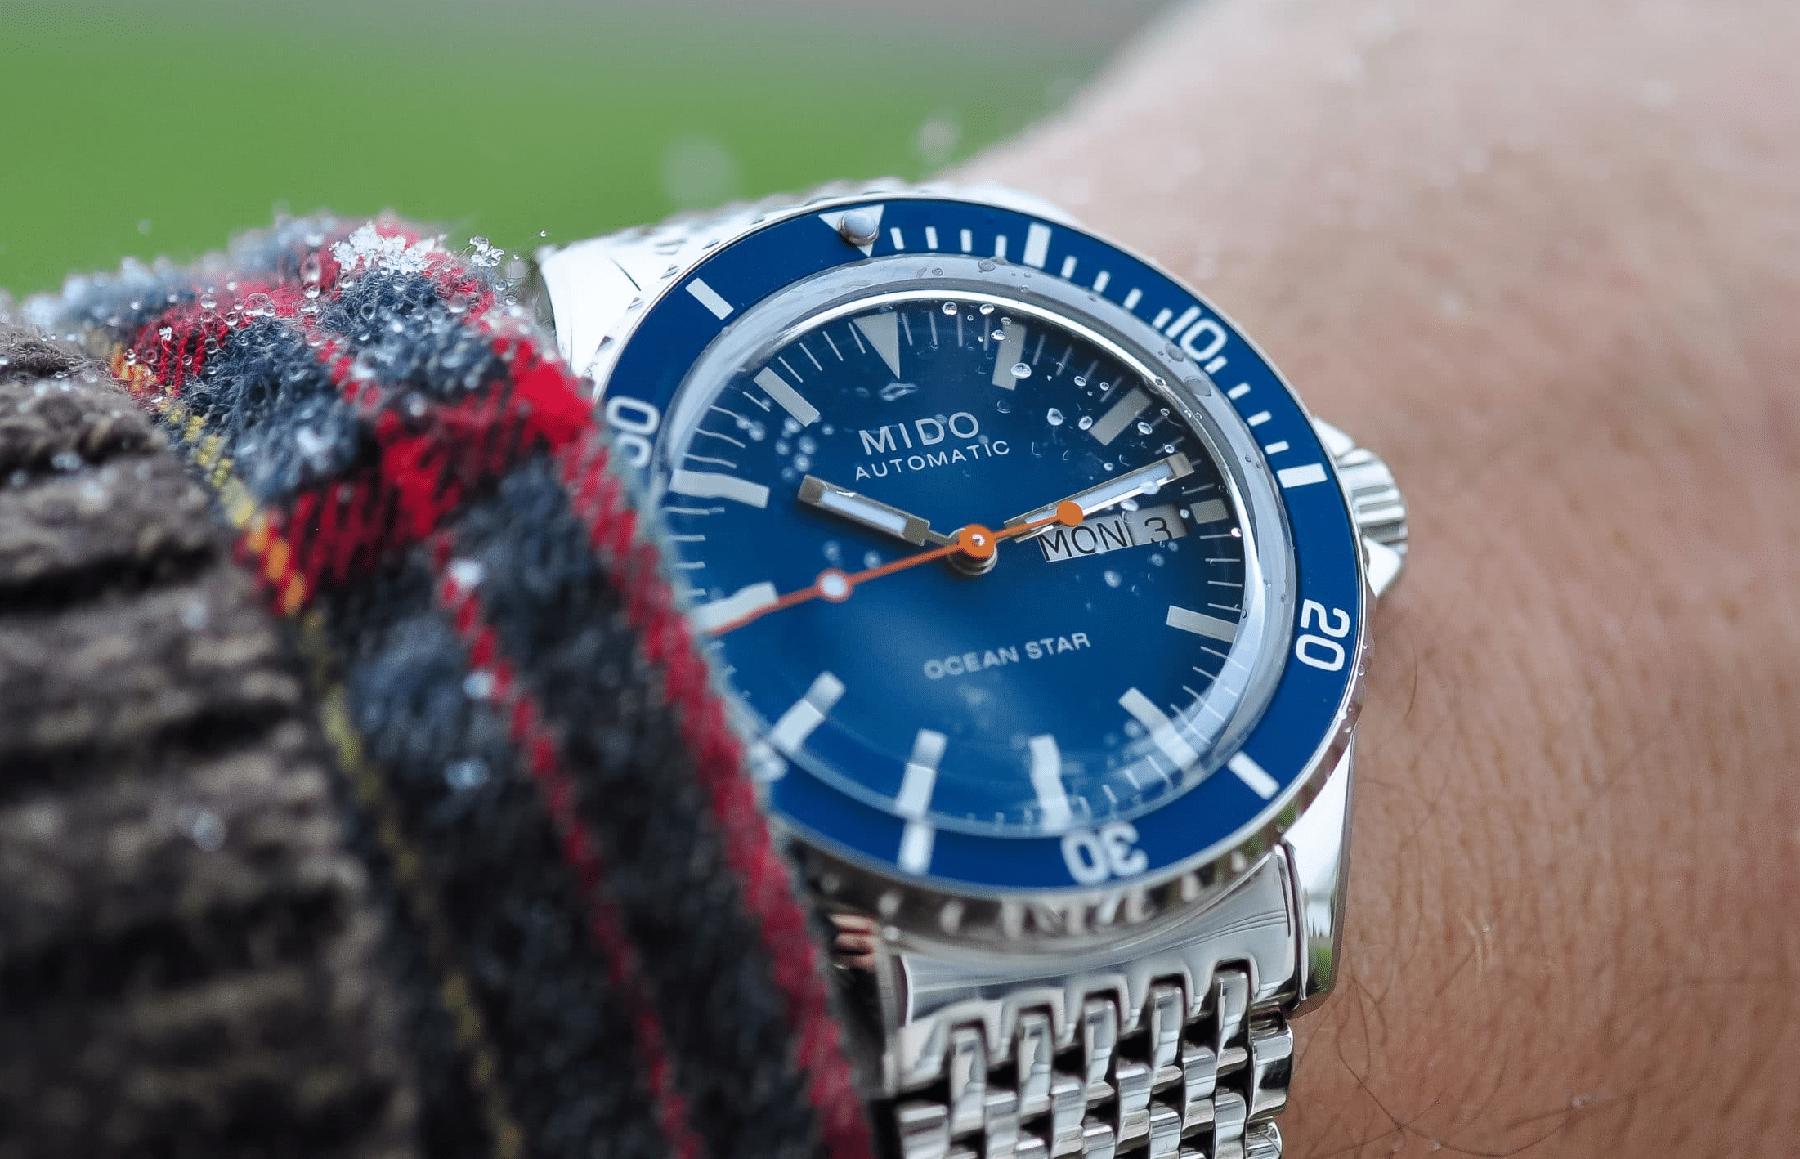 The 15 Best Watches Under $200 for New Collectors